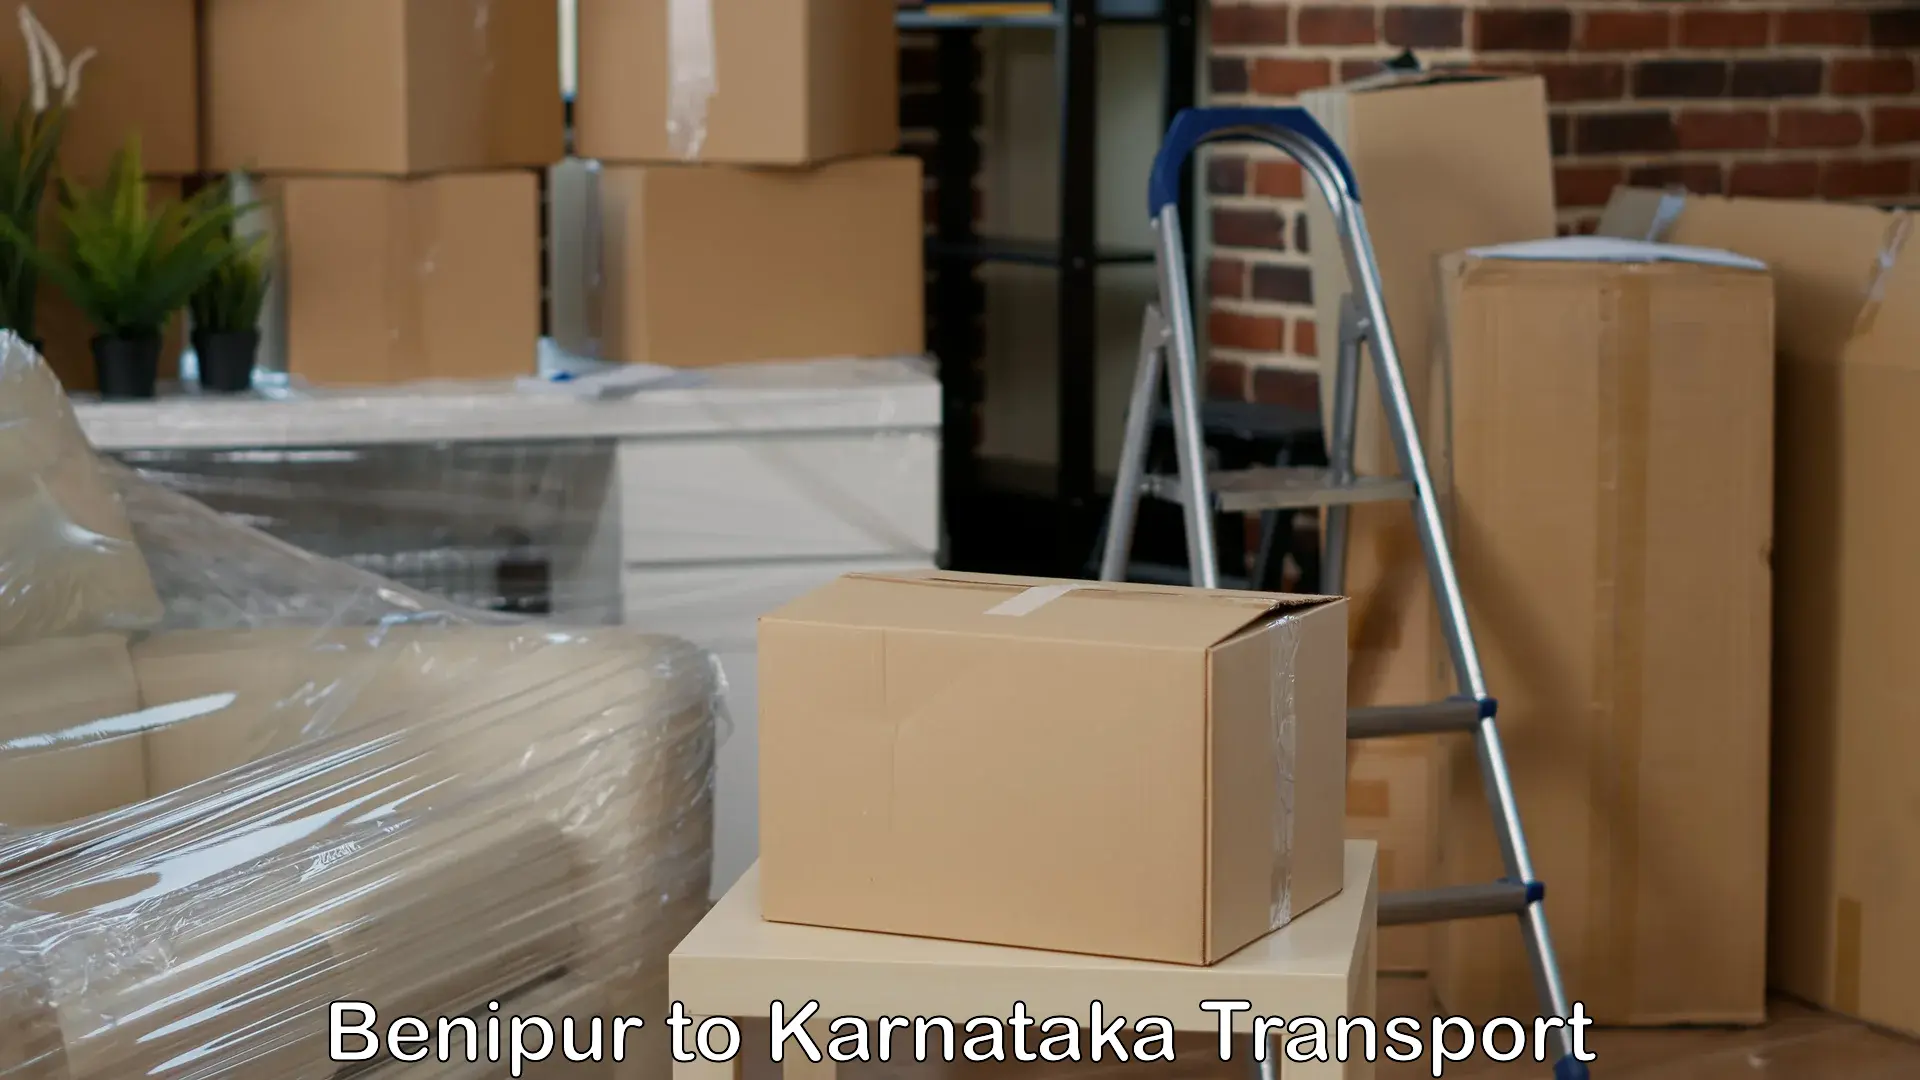 Cargo transport services Benipur to Manipal Academy of Higher Education